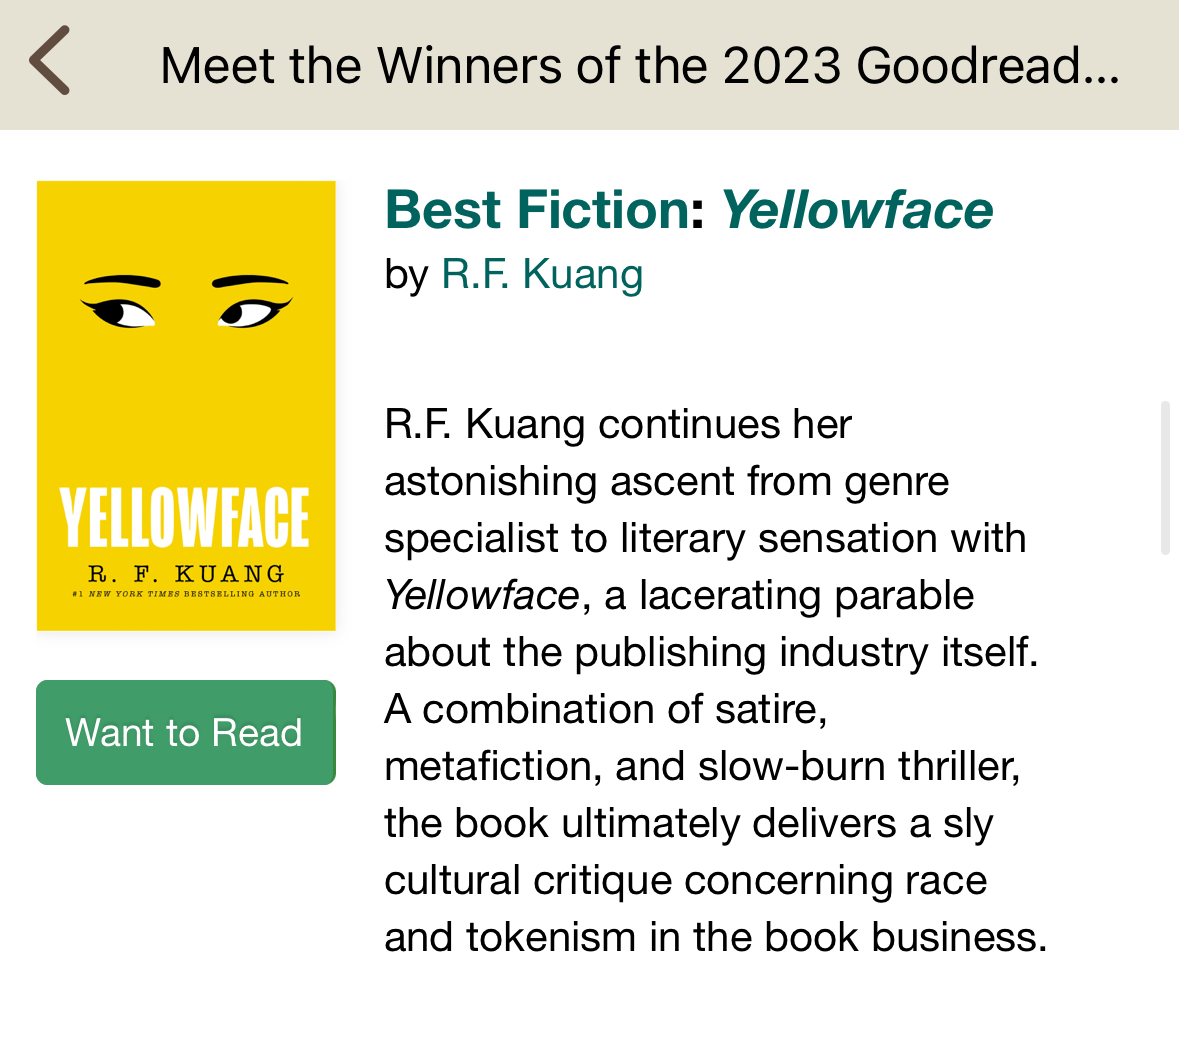 Yellowface, by R.F. Kuang, wins Best Fiction in the 2023 Goodreads choice awards.